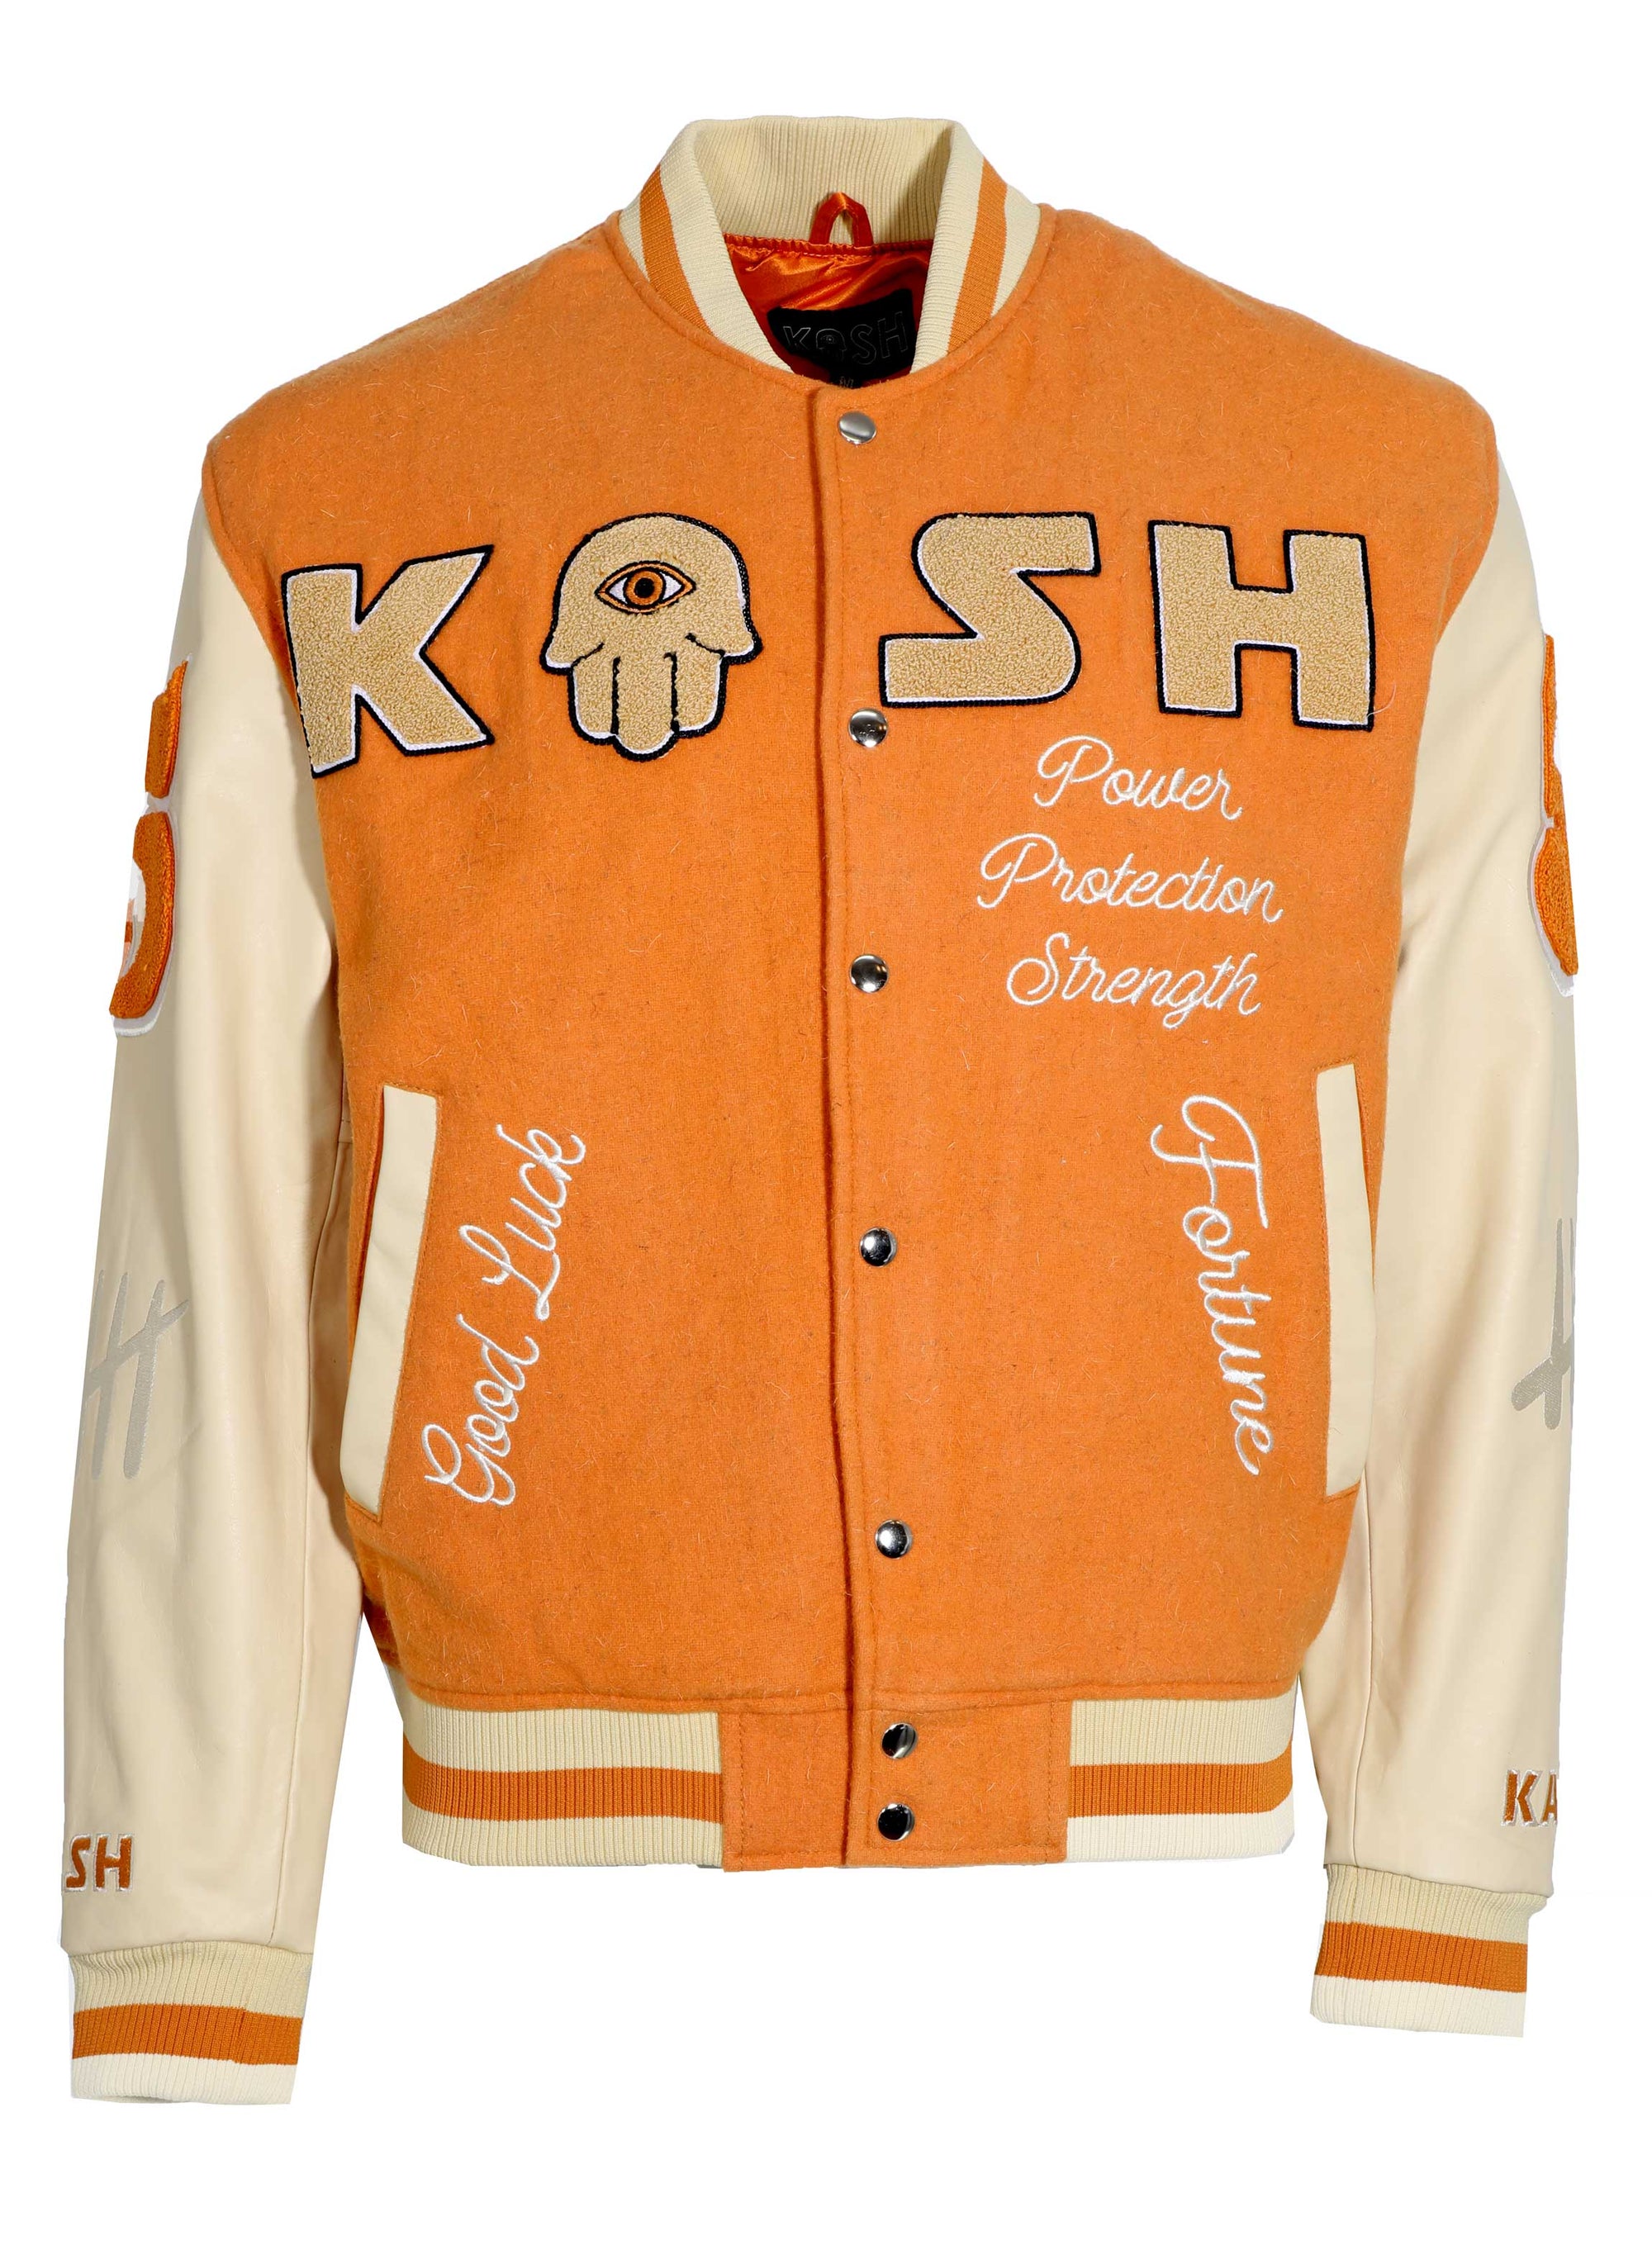 KASH AUTHENTIC LEATHER AND WOOL JACKET WITH CHENILLE DETAILS - ORANGE